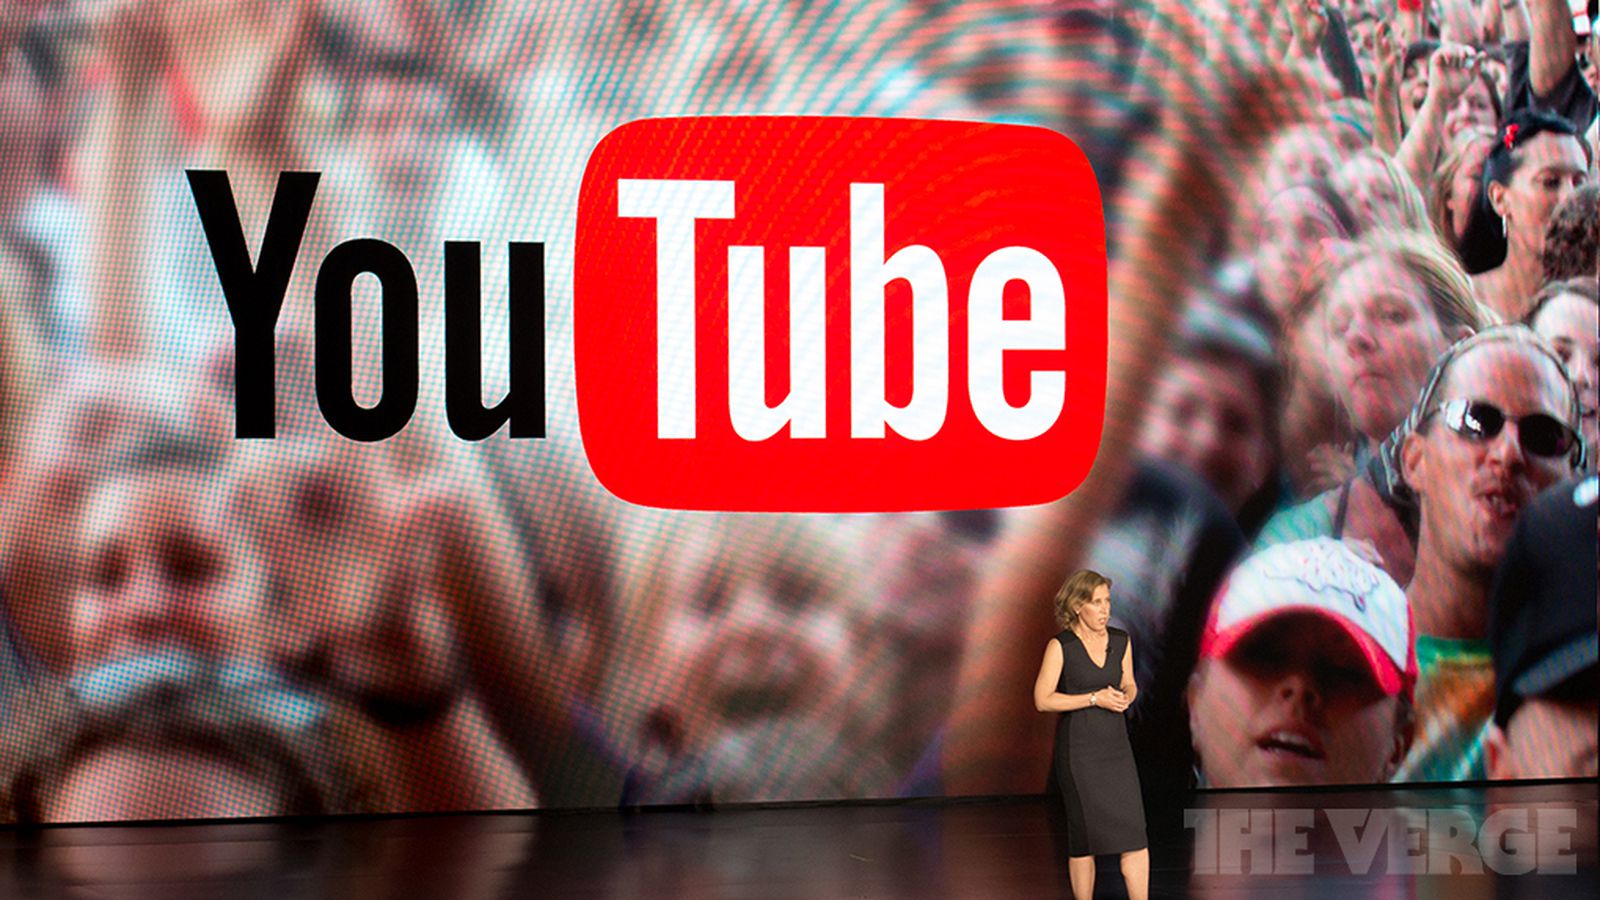 YouTube drops Flash for HTML5 video as default - The Verge